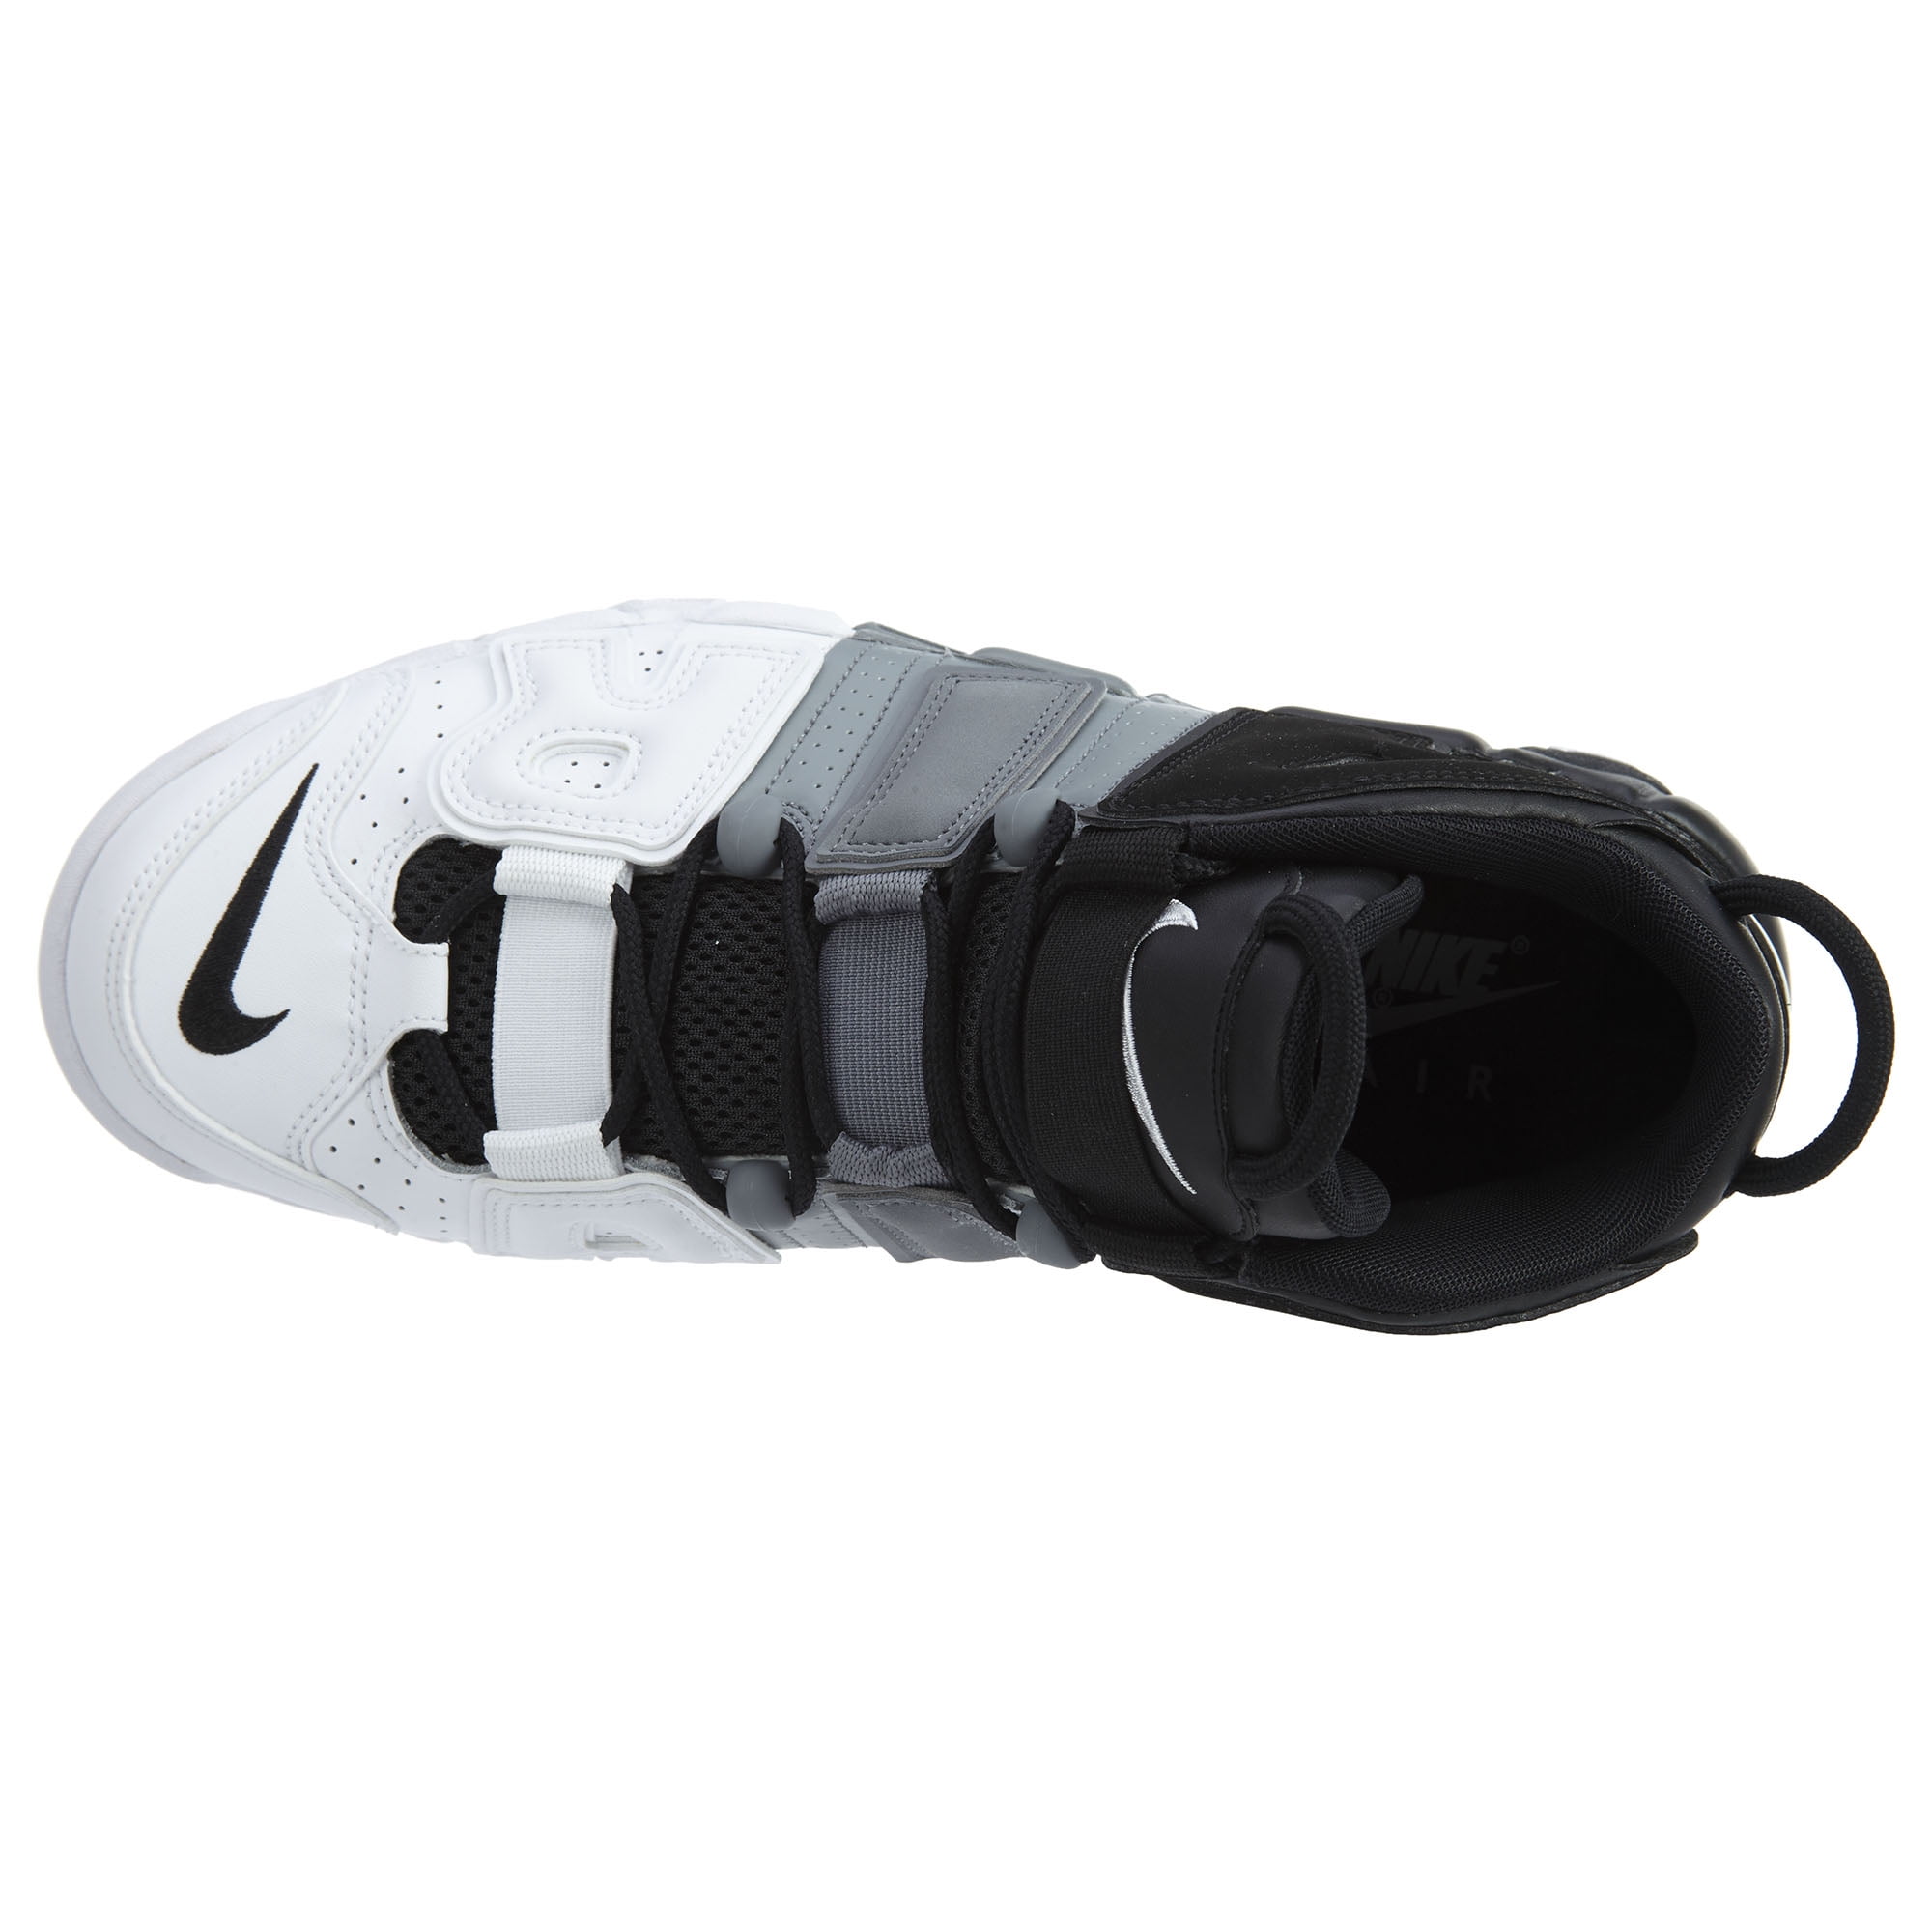 NIKE AIR MORE UPTEMPO 96 TRI-COLOR WHITEGRAYBLACK 415082-005 Shoes Boys  Size 5Y